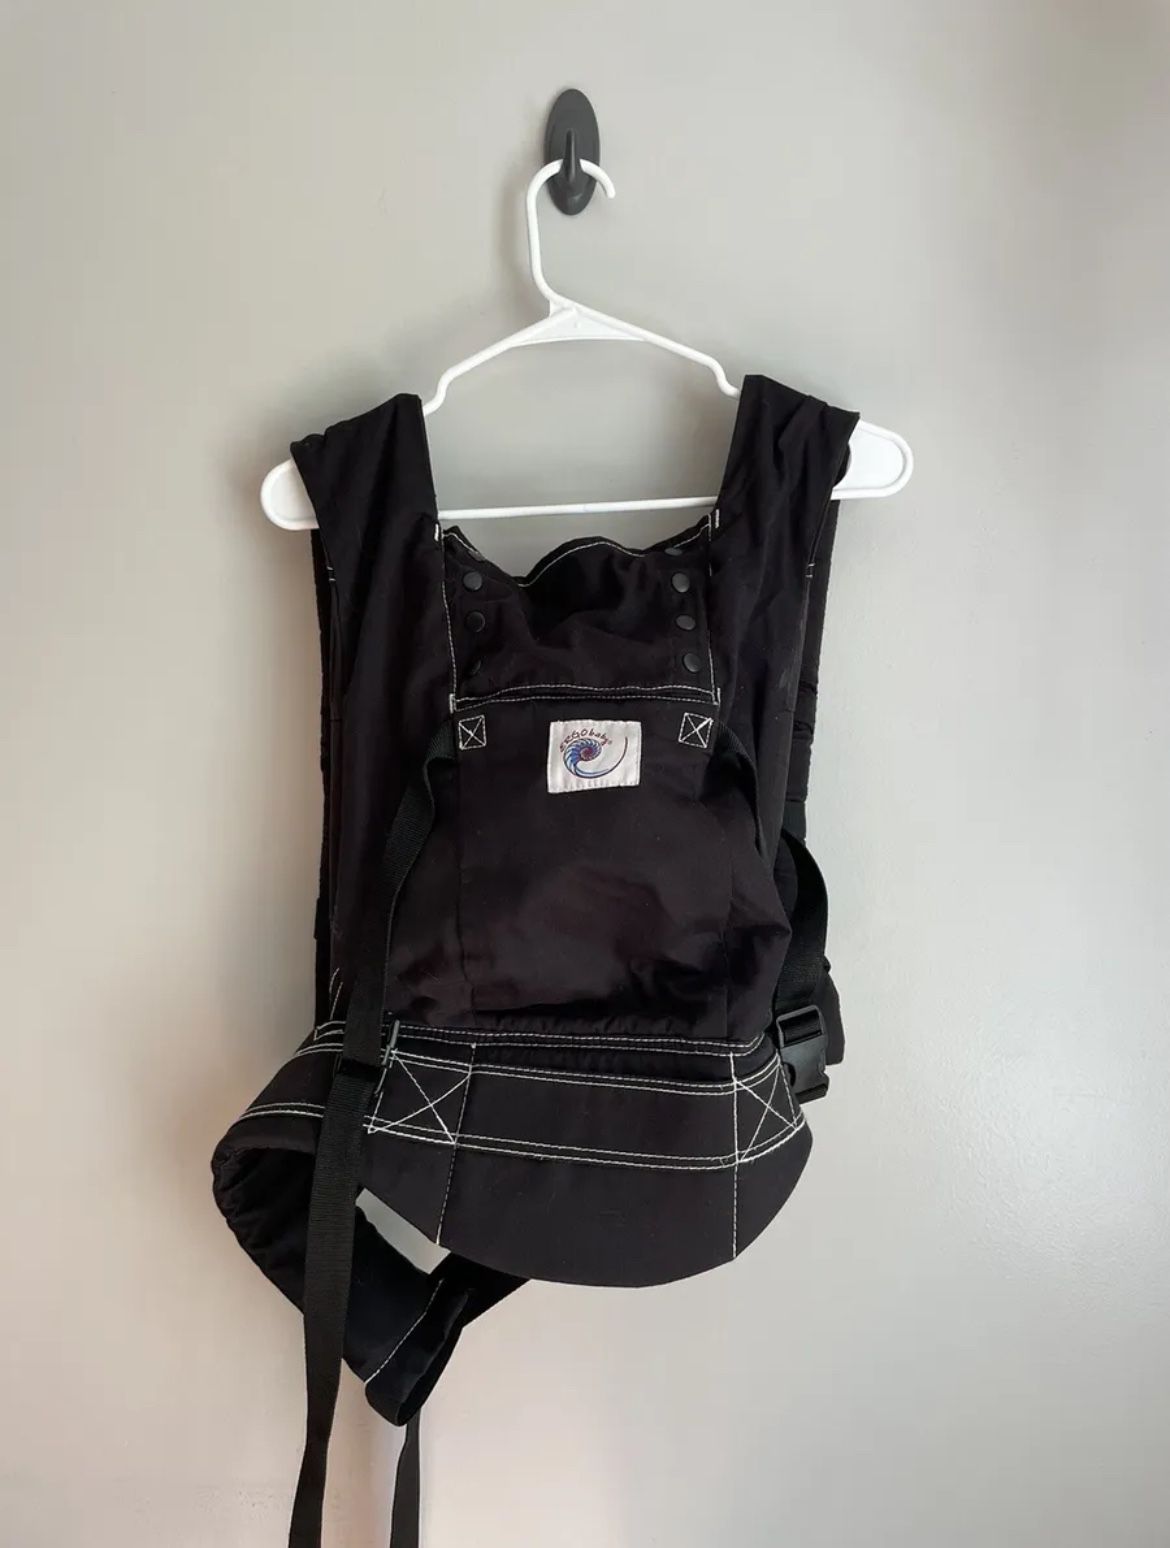 Black Ergo Cotton Adjustable Baby Toddler Carrier With Sun Shade Excellent Condition